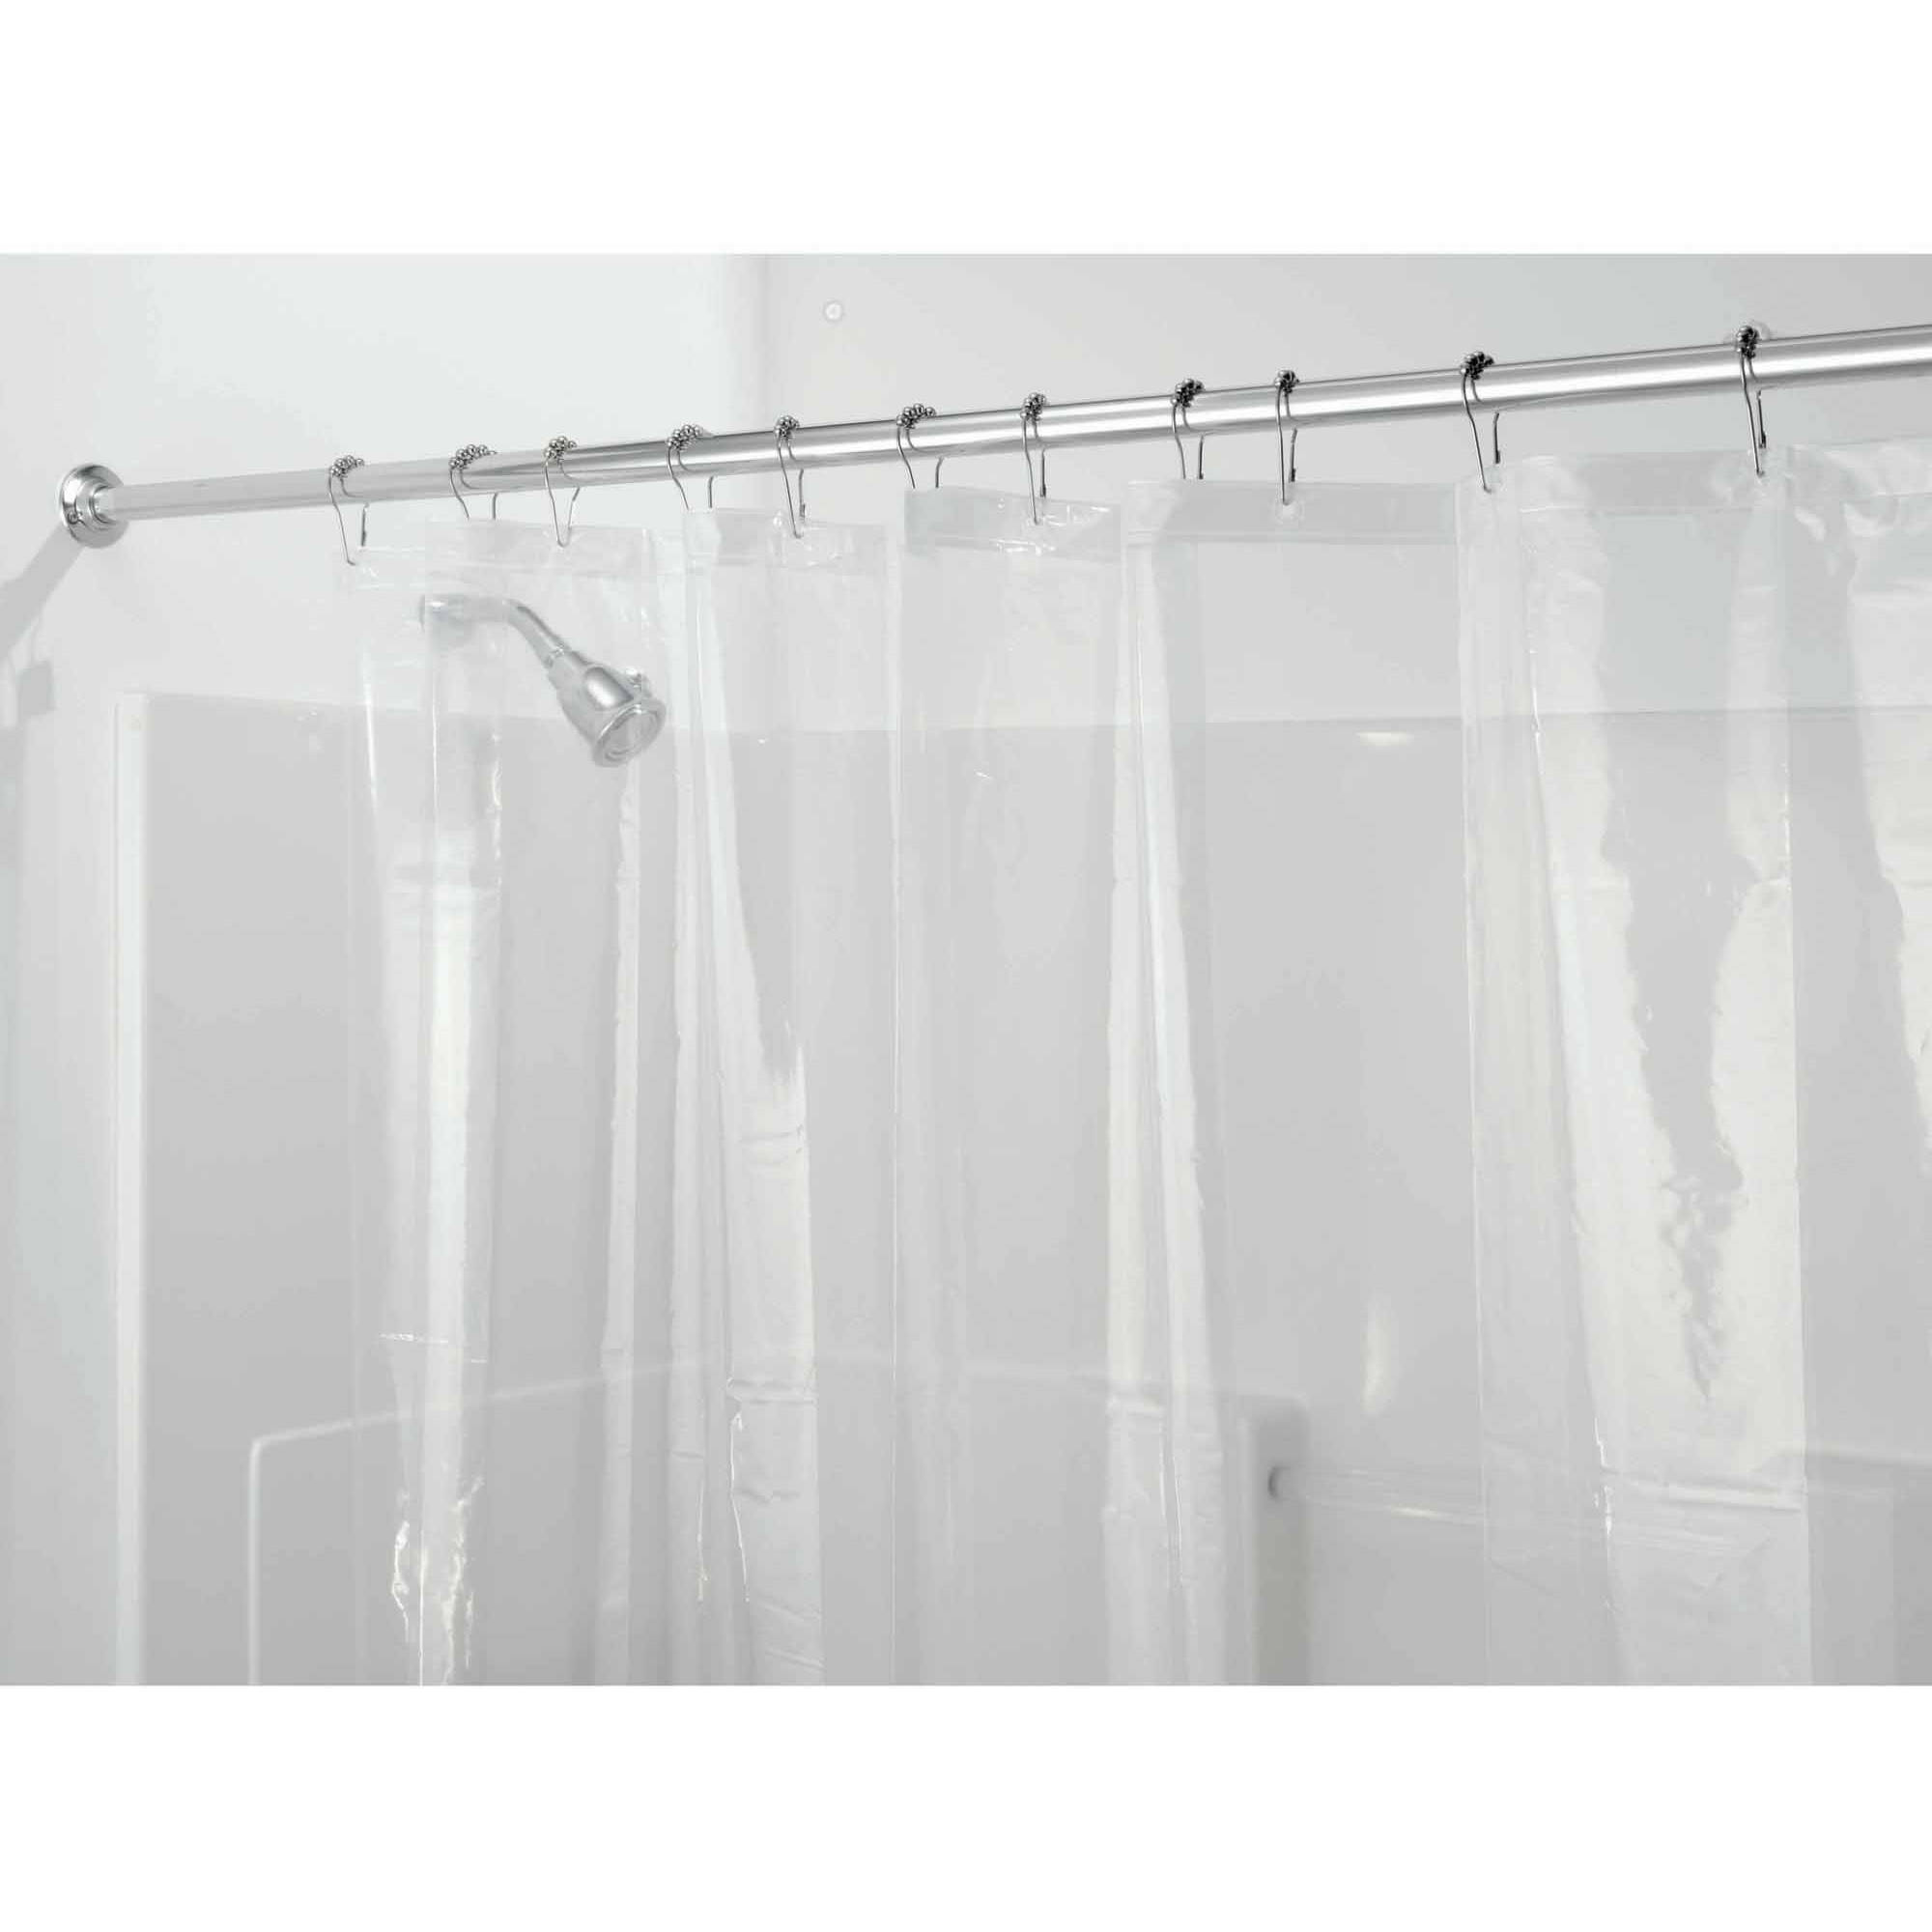 iDesign Clear PVC-Free Mildew Resistant Stall Shower Curtain Liner, 54" x 78" - image 3 of 8